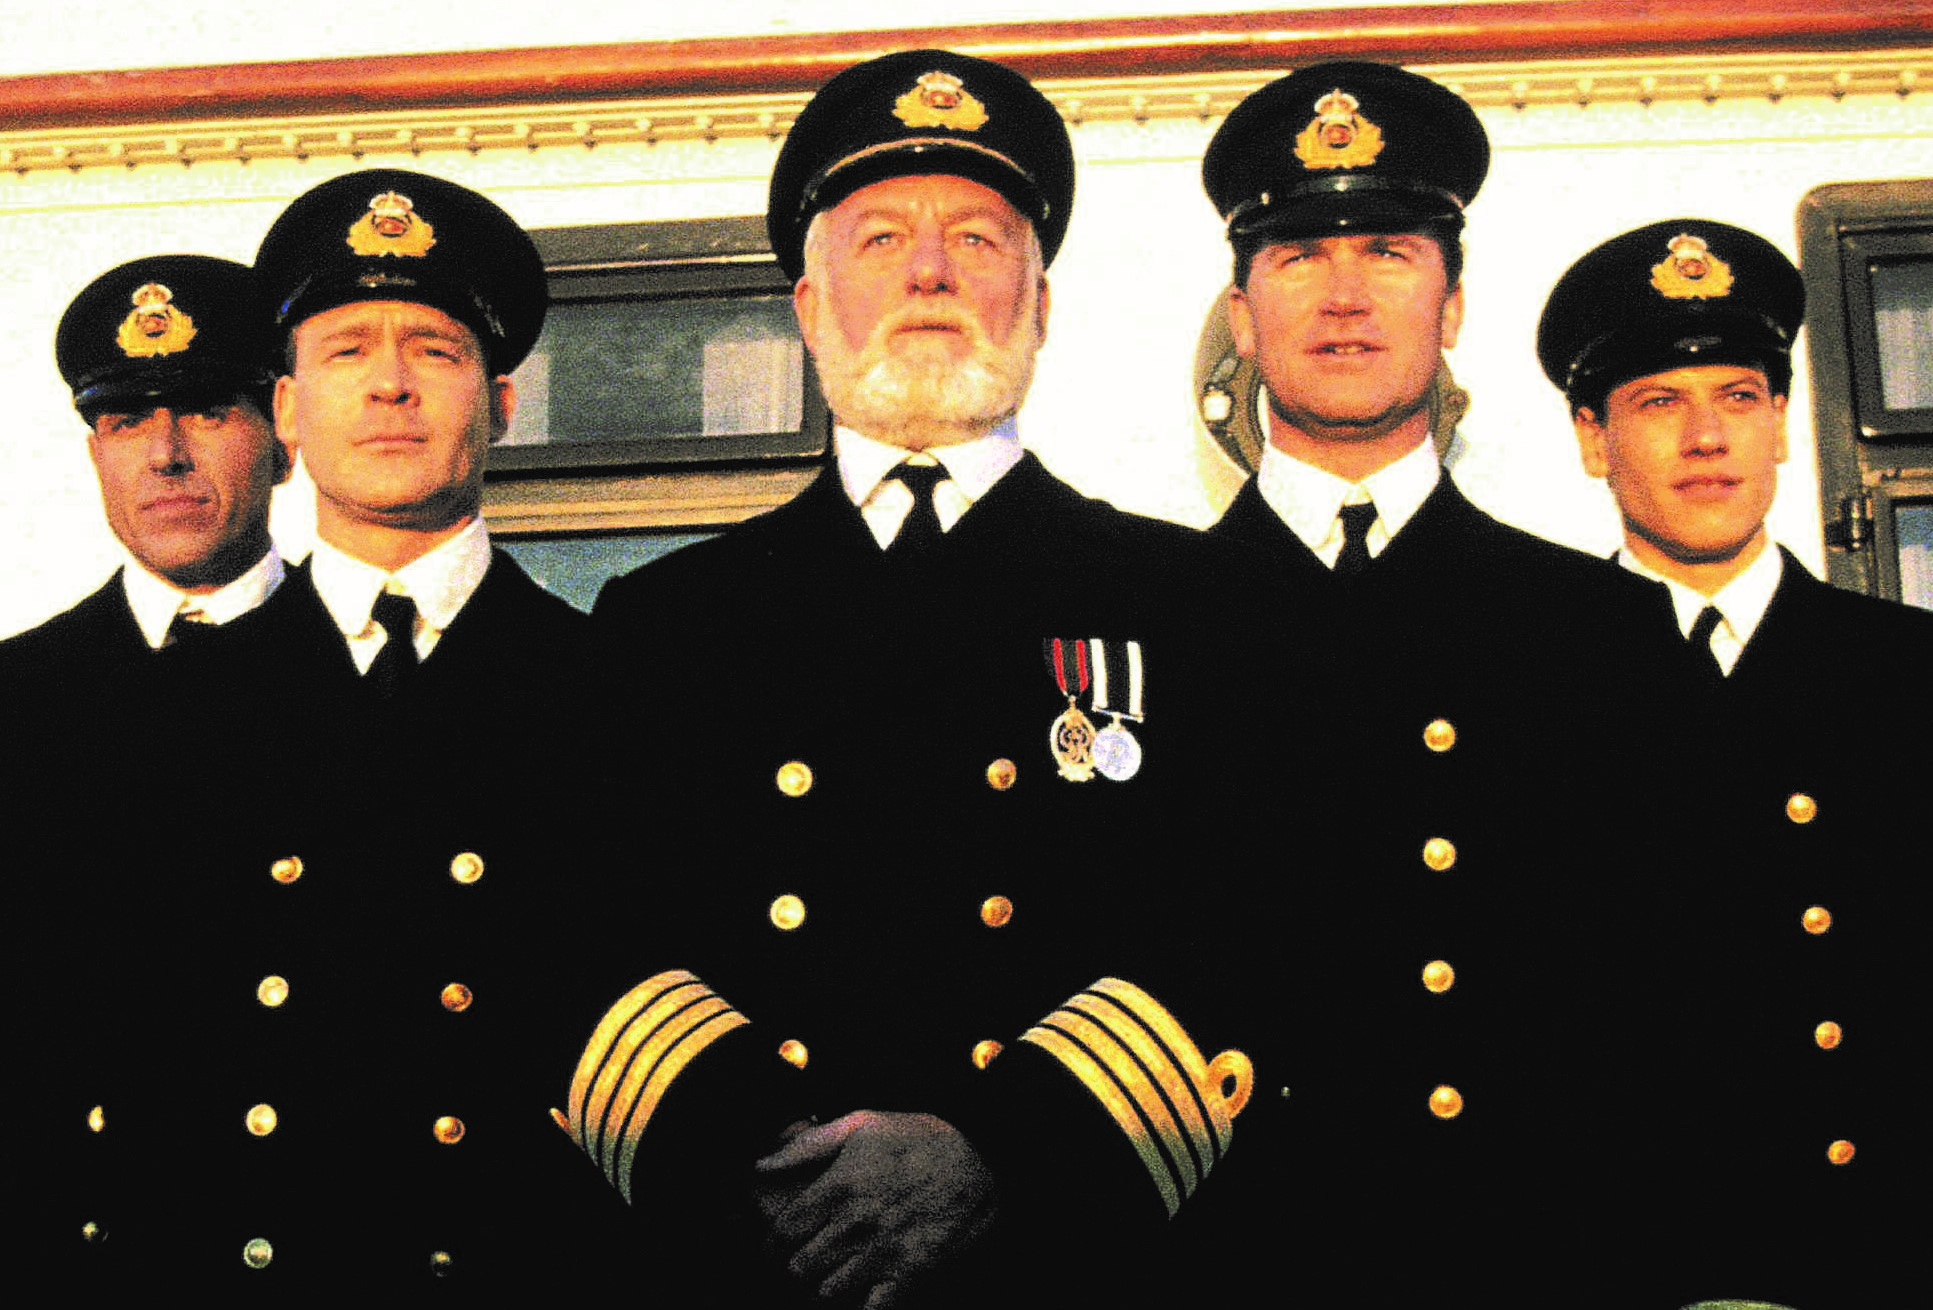 A few words about uniforms in the civil fleet: